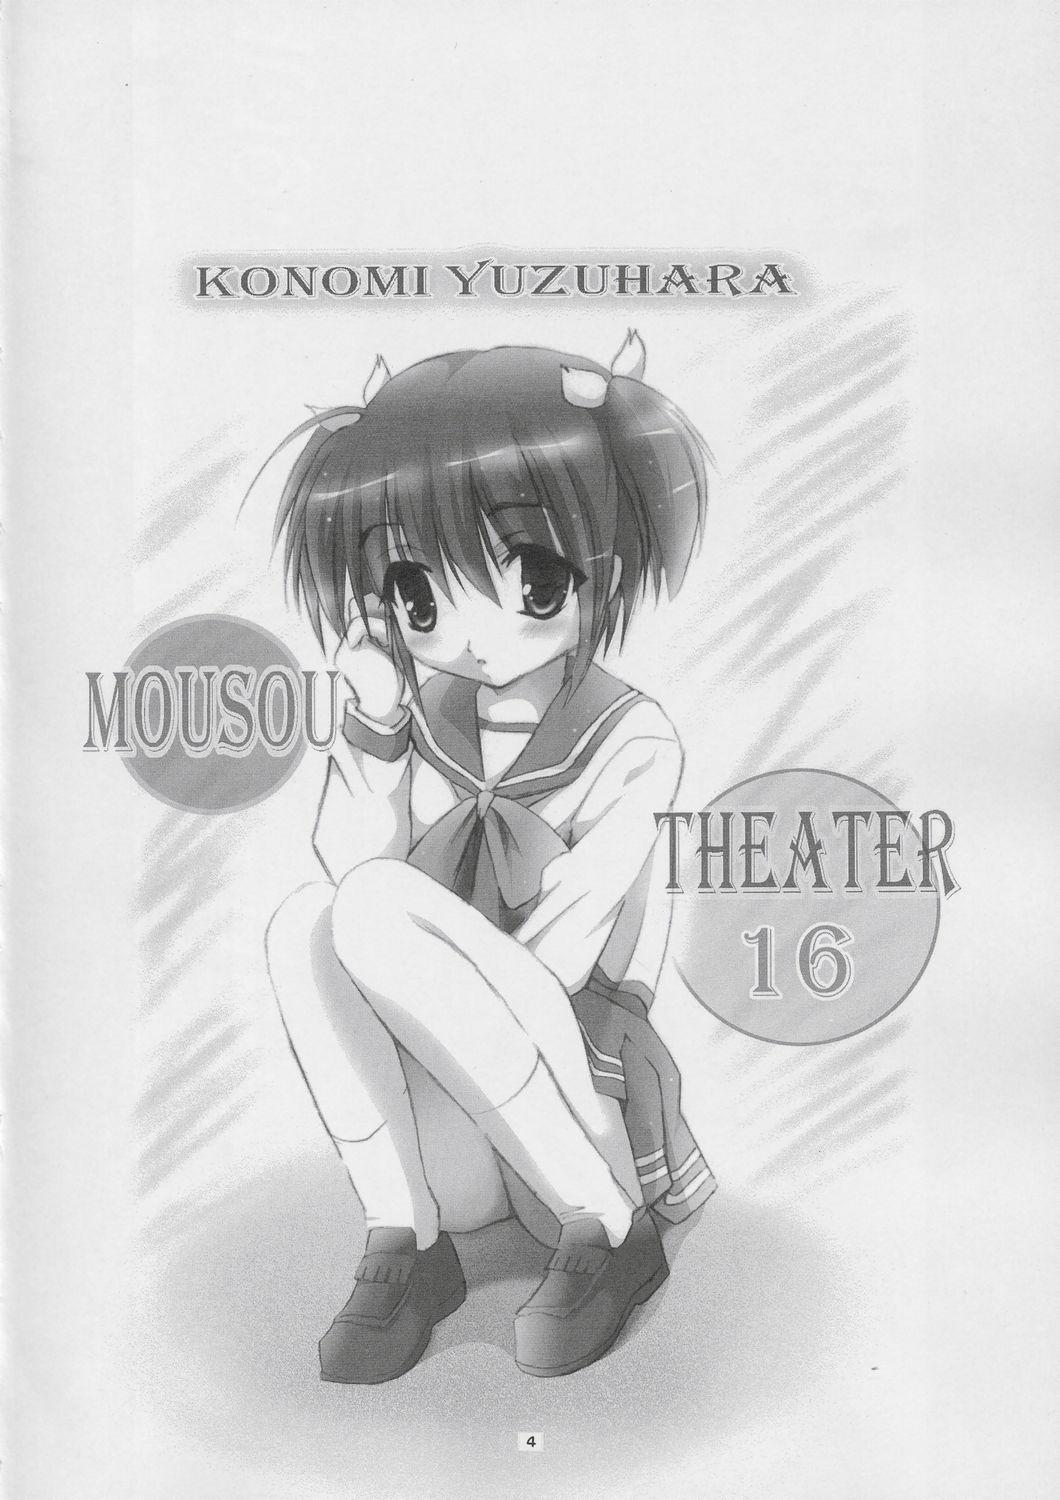 Vagina MOUSOU THEATER 16 - Toheart2 Assfingering - Page 3